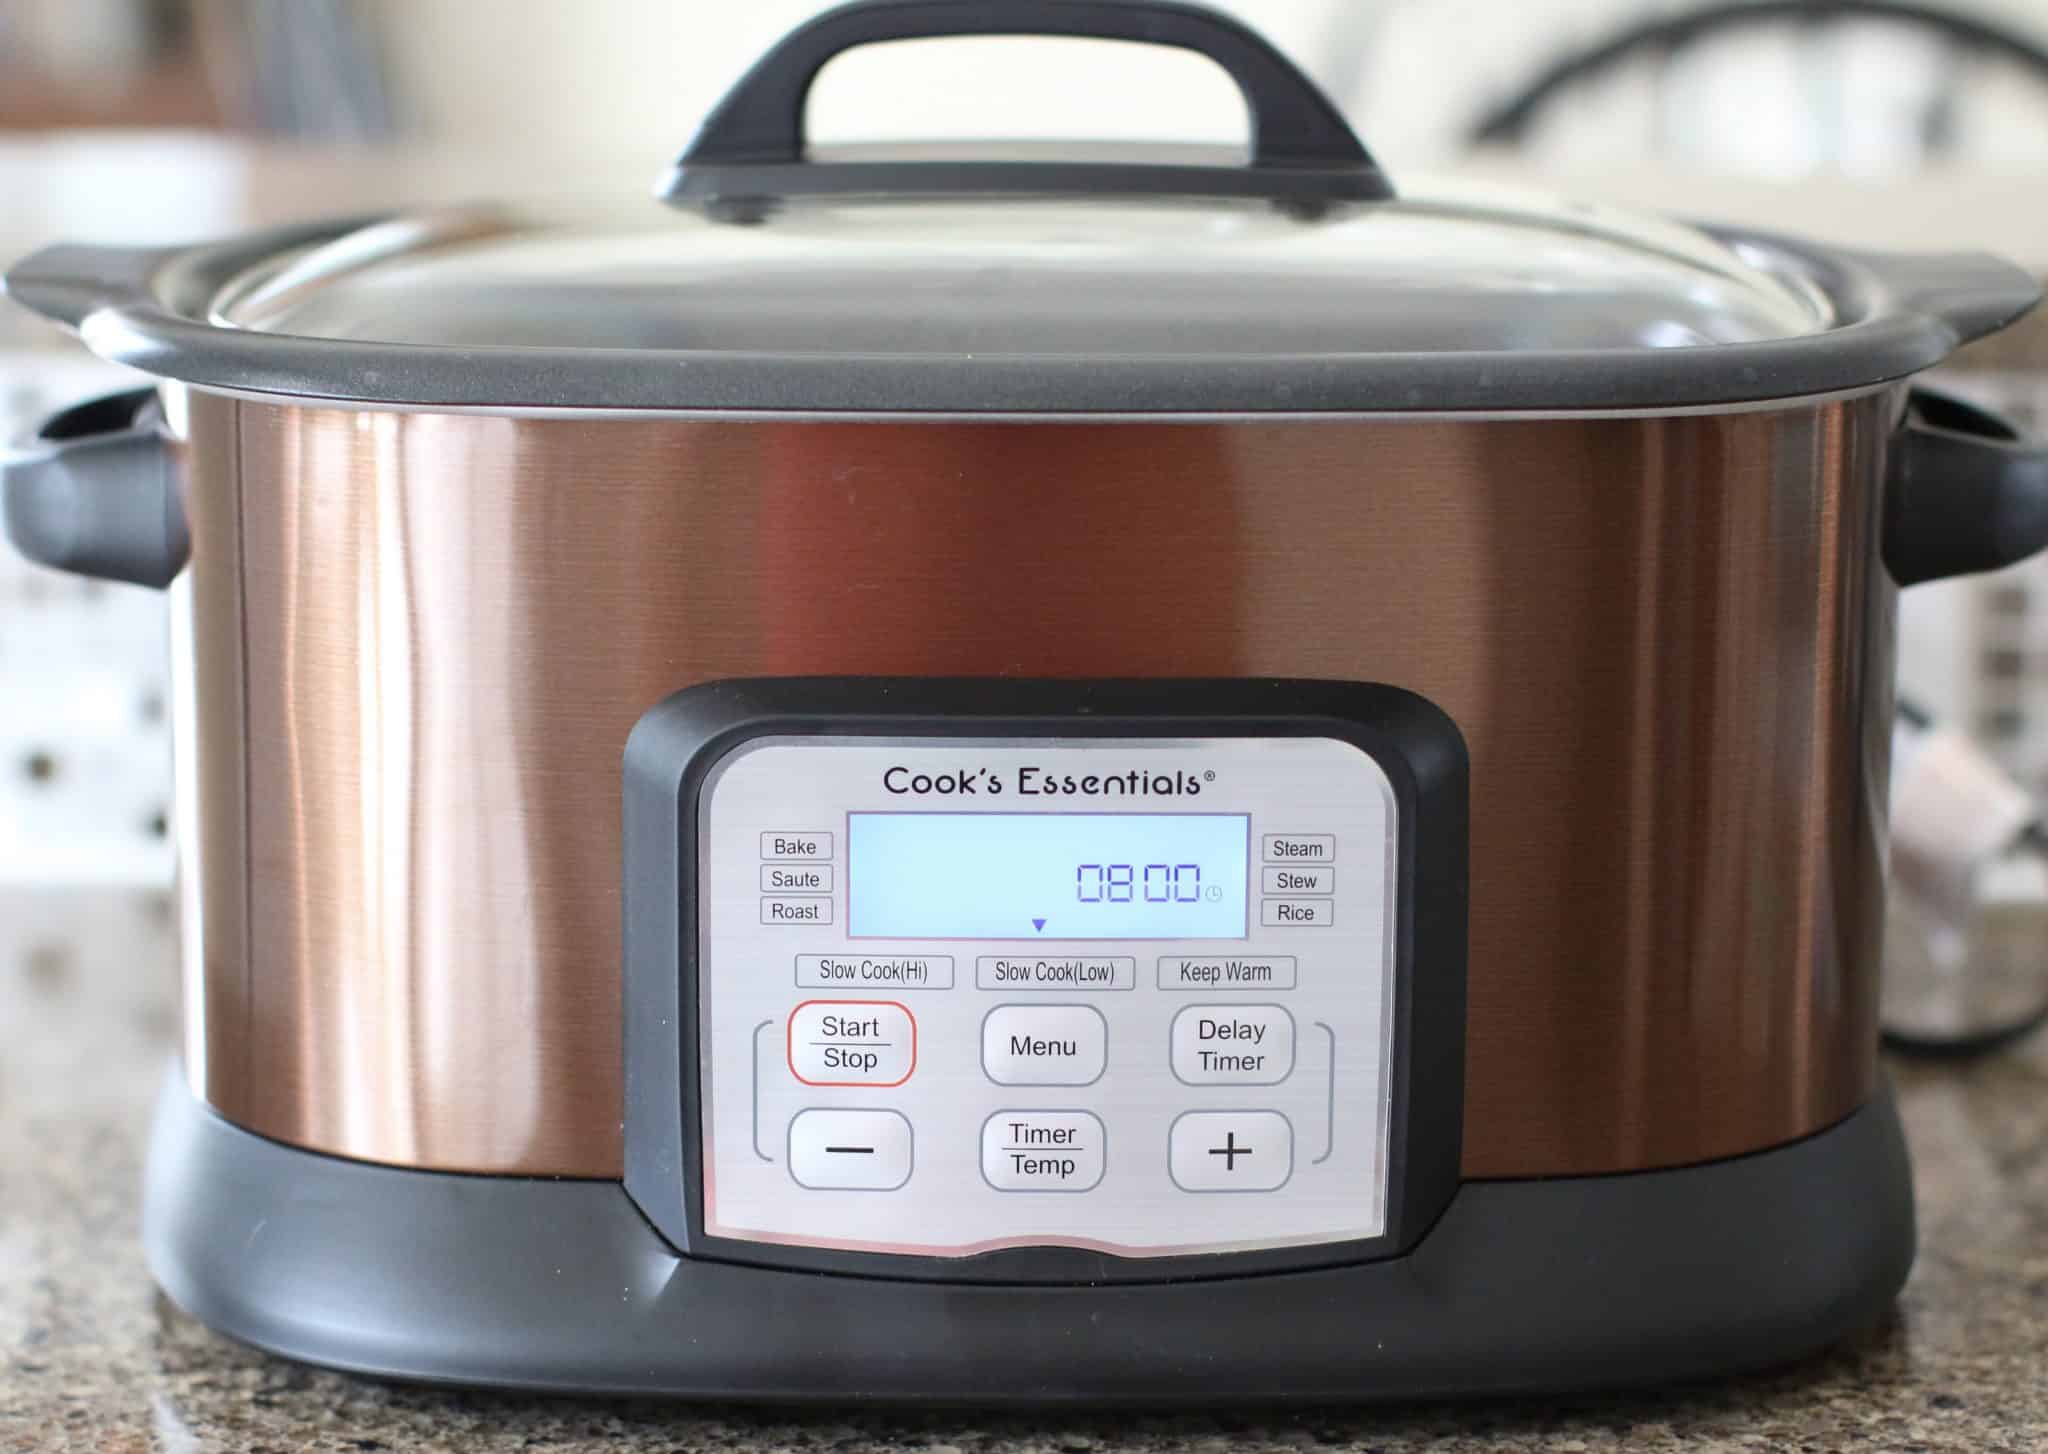 digital slow cooker showing an 8 hour cooking time.